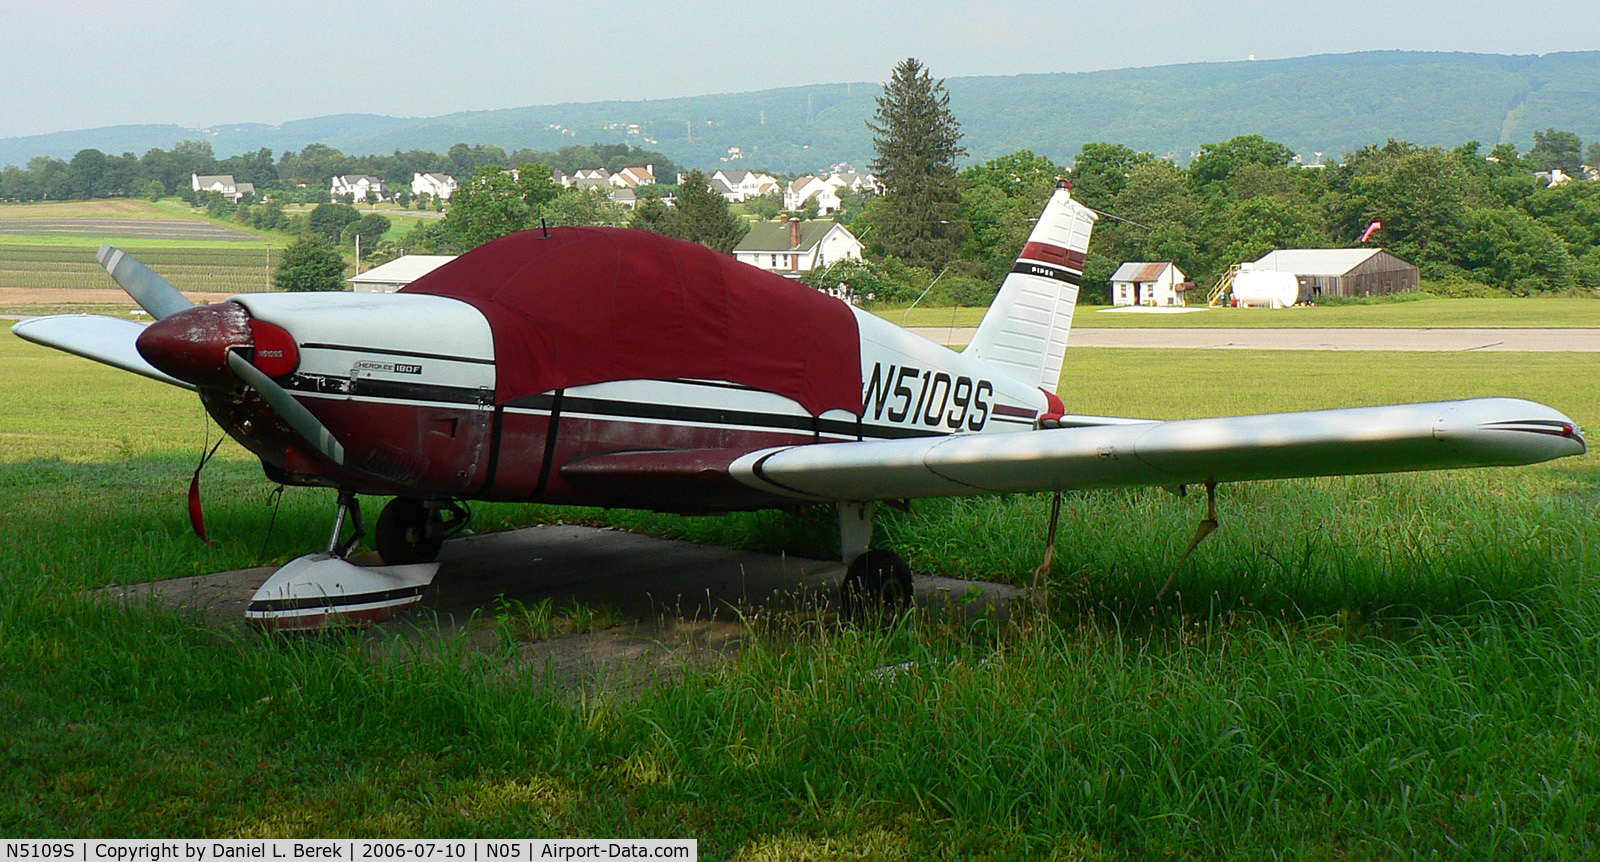 N5109S, 1971 Piper PA-28-180 C/N 28-7105129, Sad, faded 1971 Cherokee Archer sits it out at Hackettstown Airport.